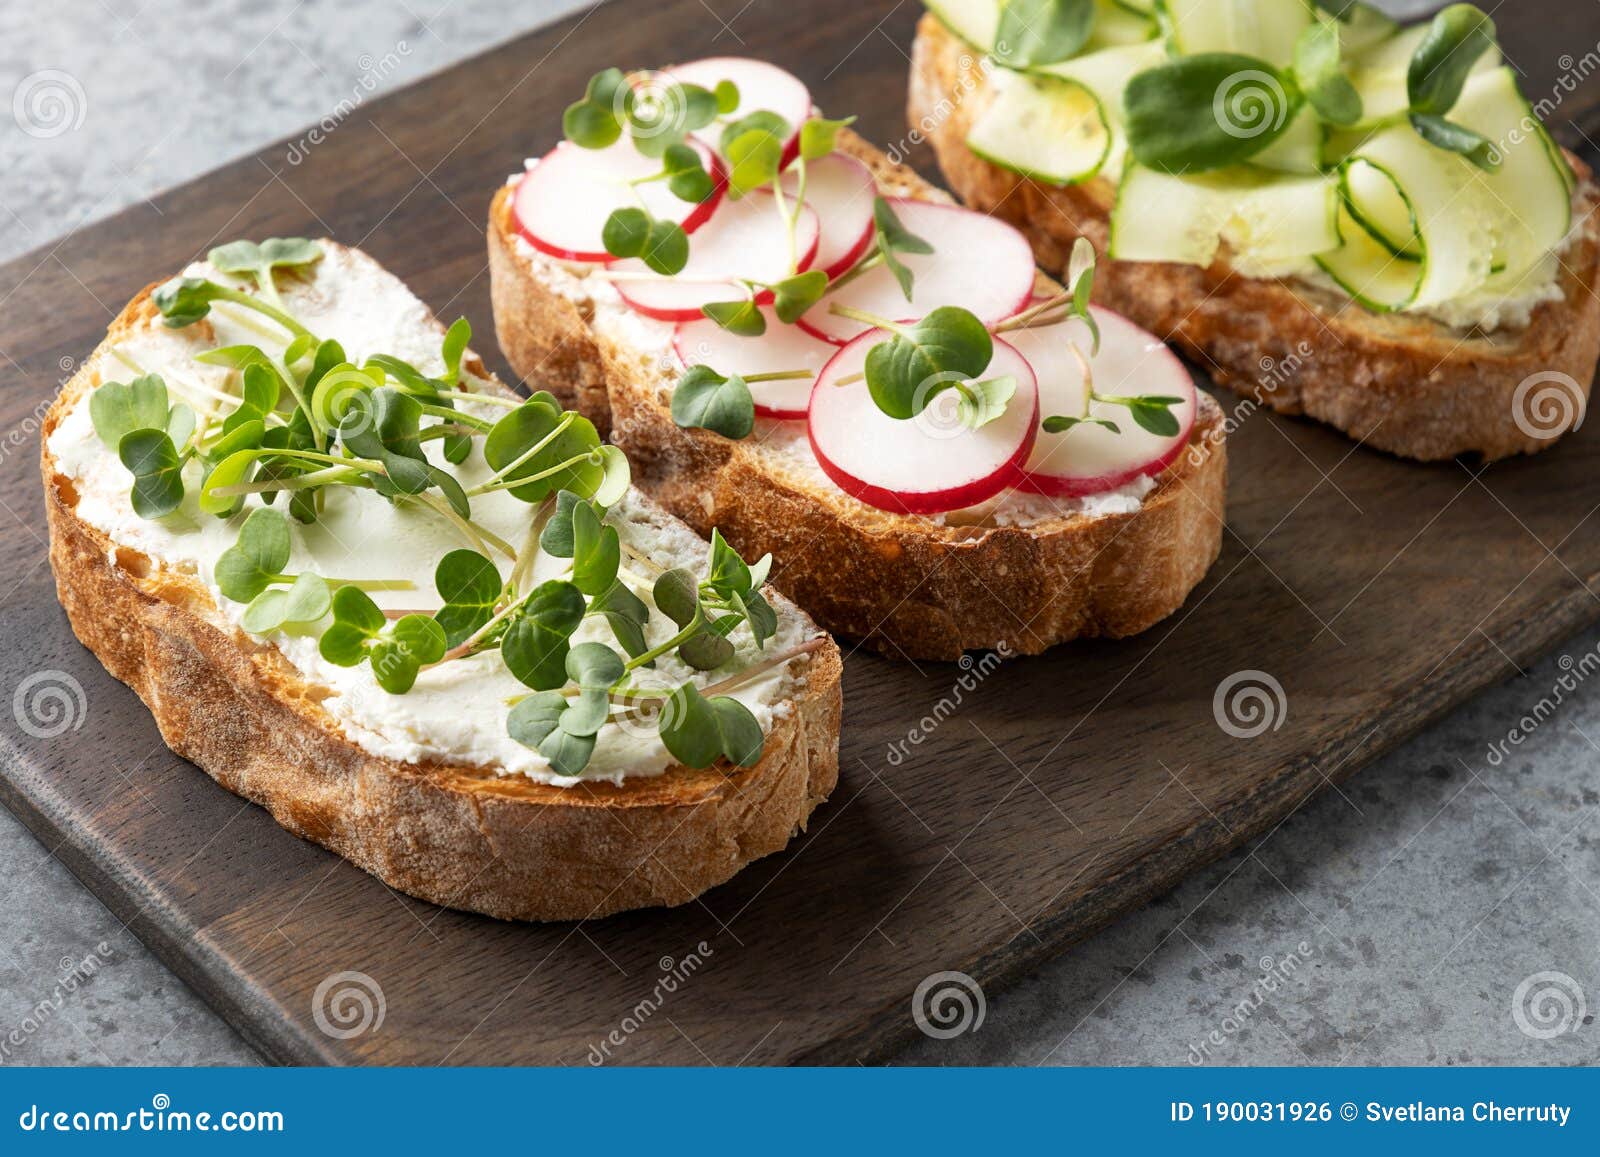 tree sandwiches with fresh radish microgreens and cream cheese on grey background. close up